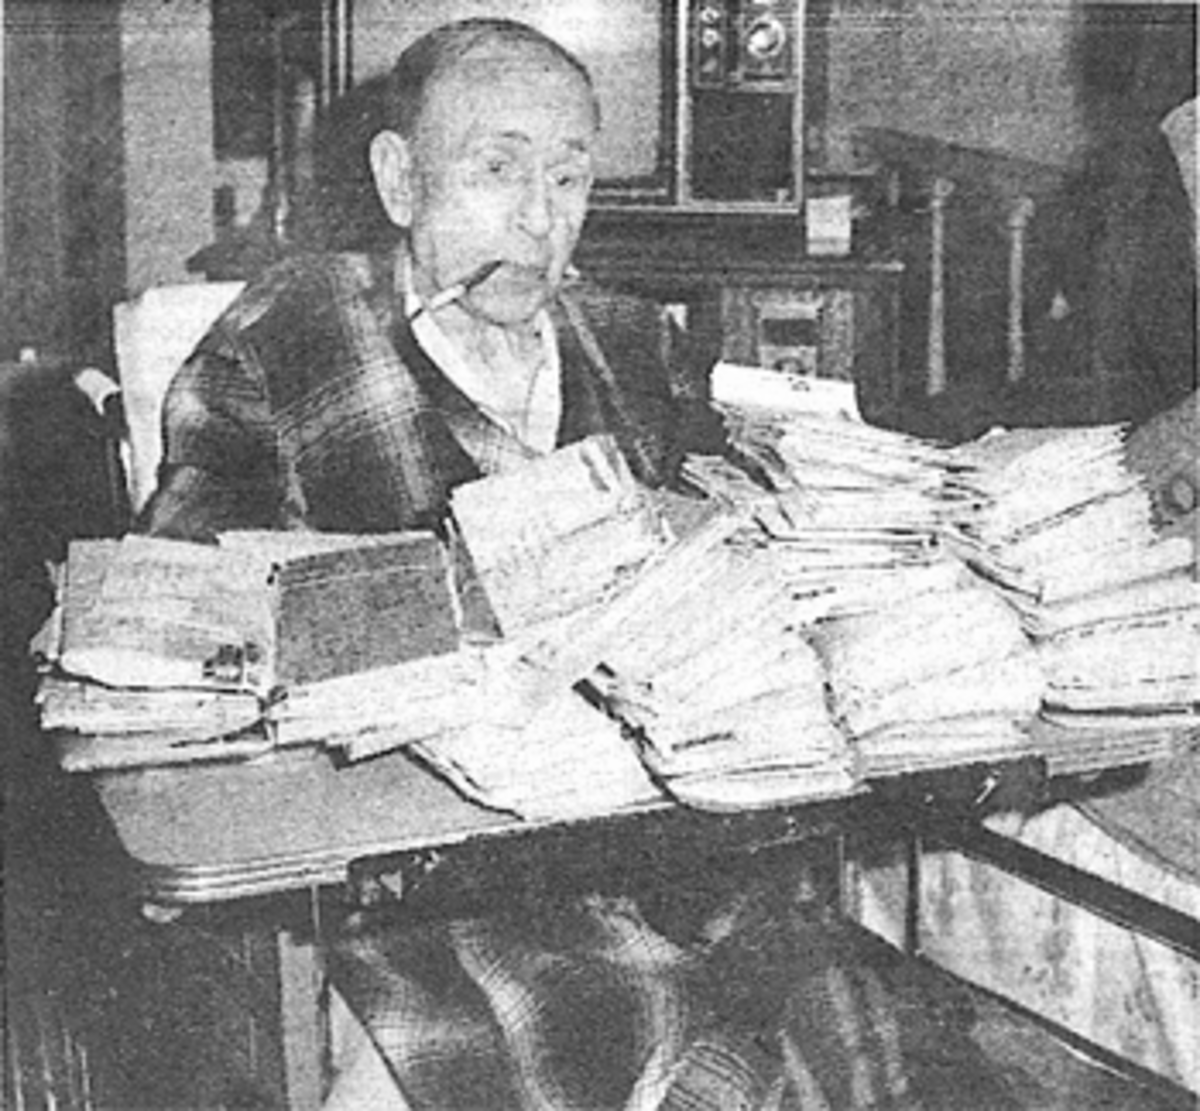 Bud Abbott and the thousands of letters he would receive from fans in his final years.